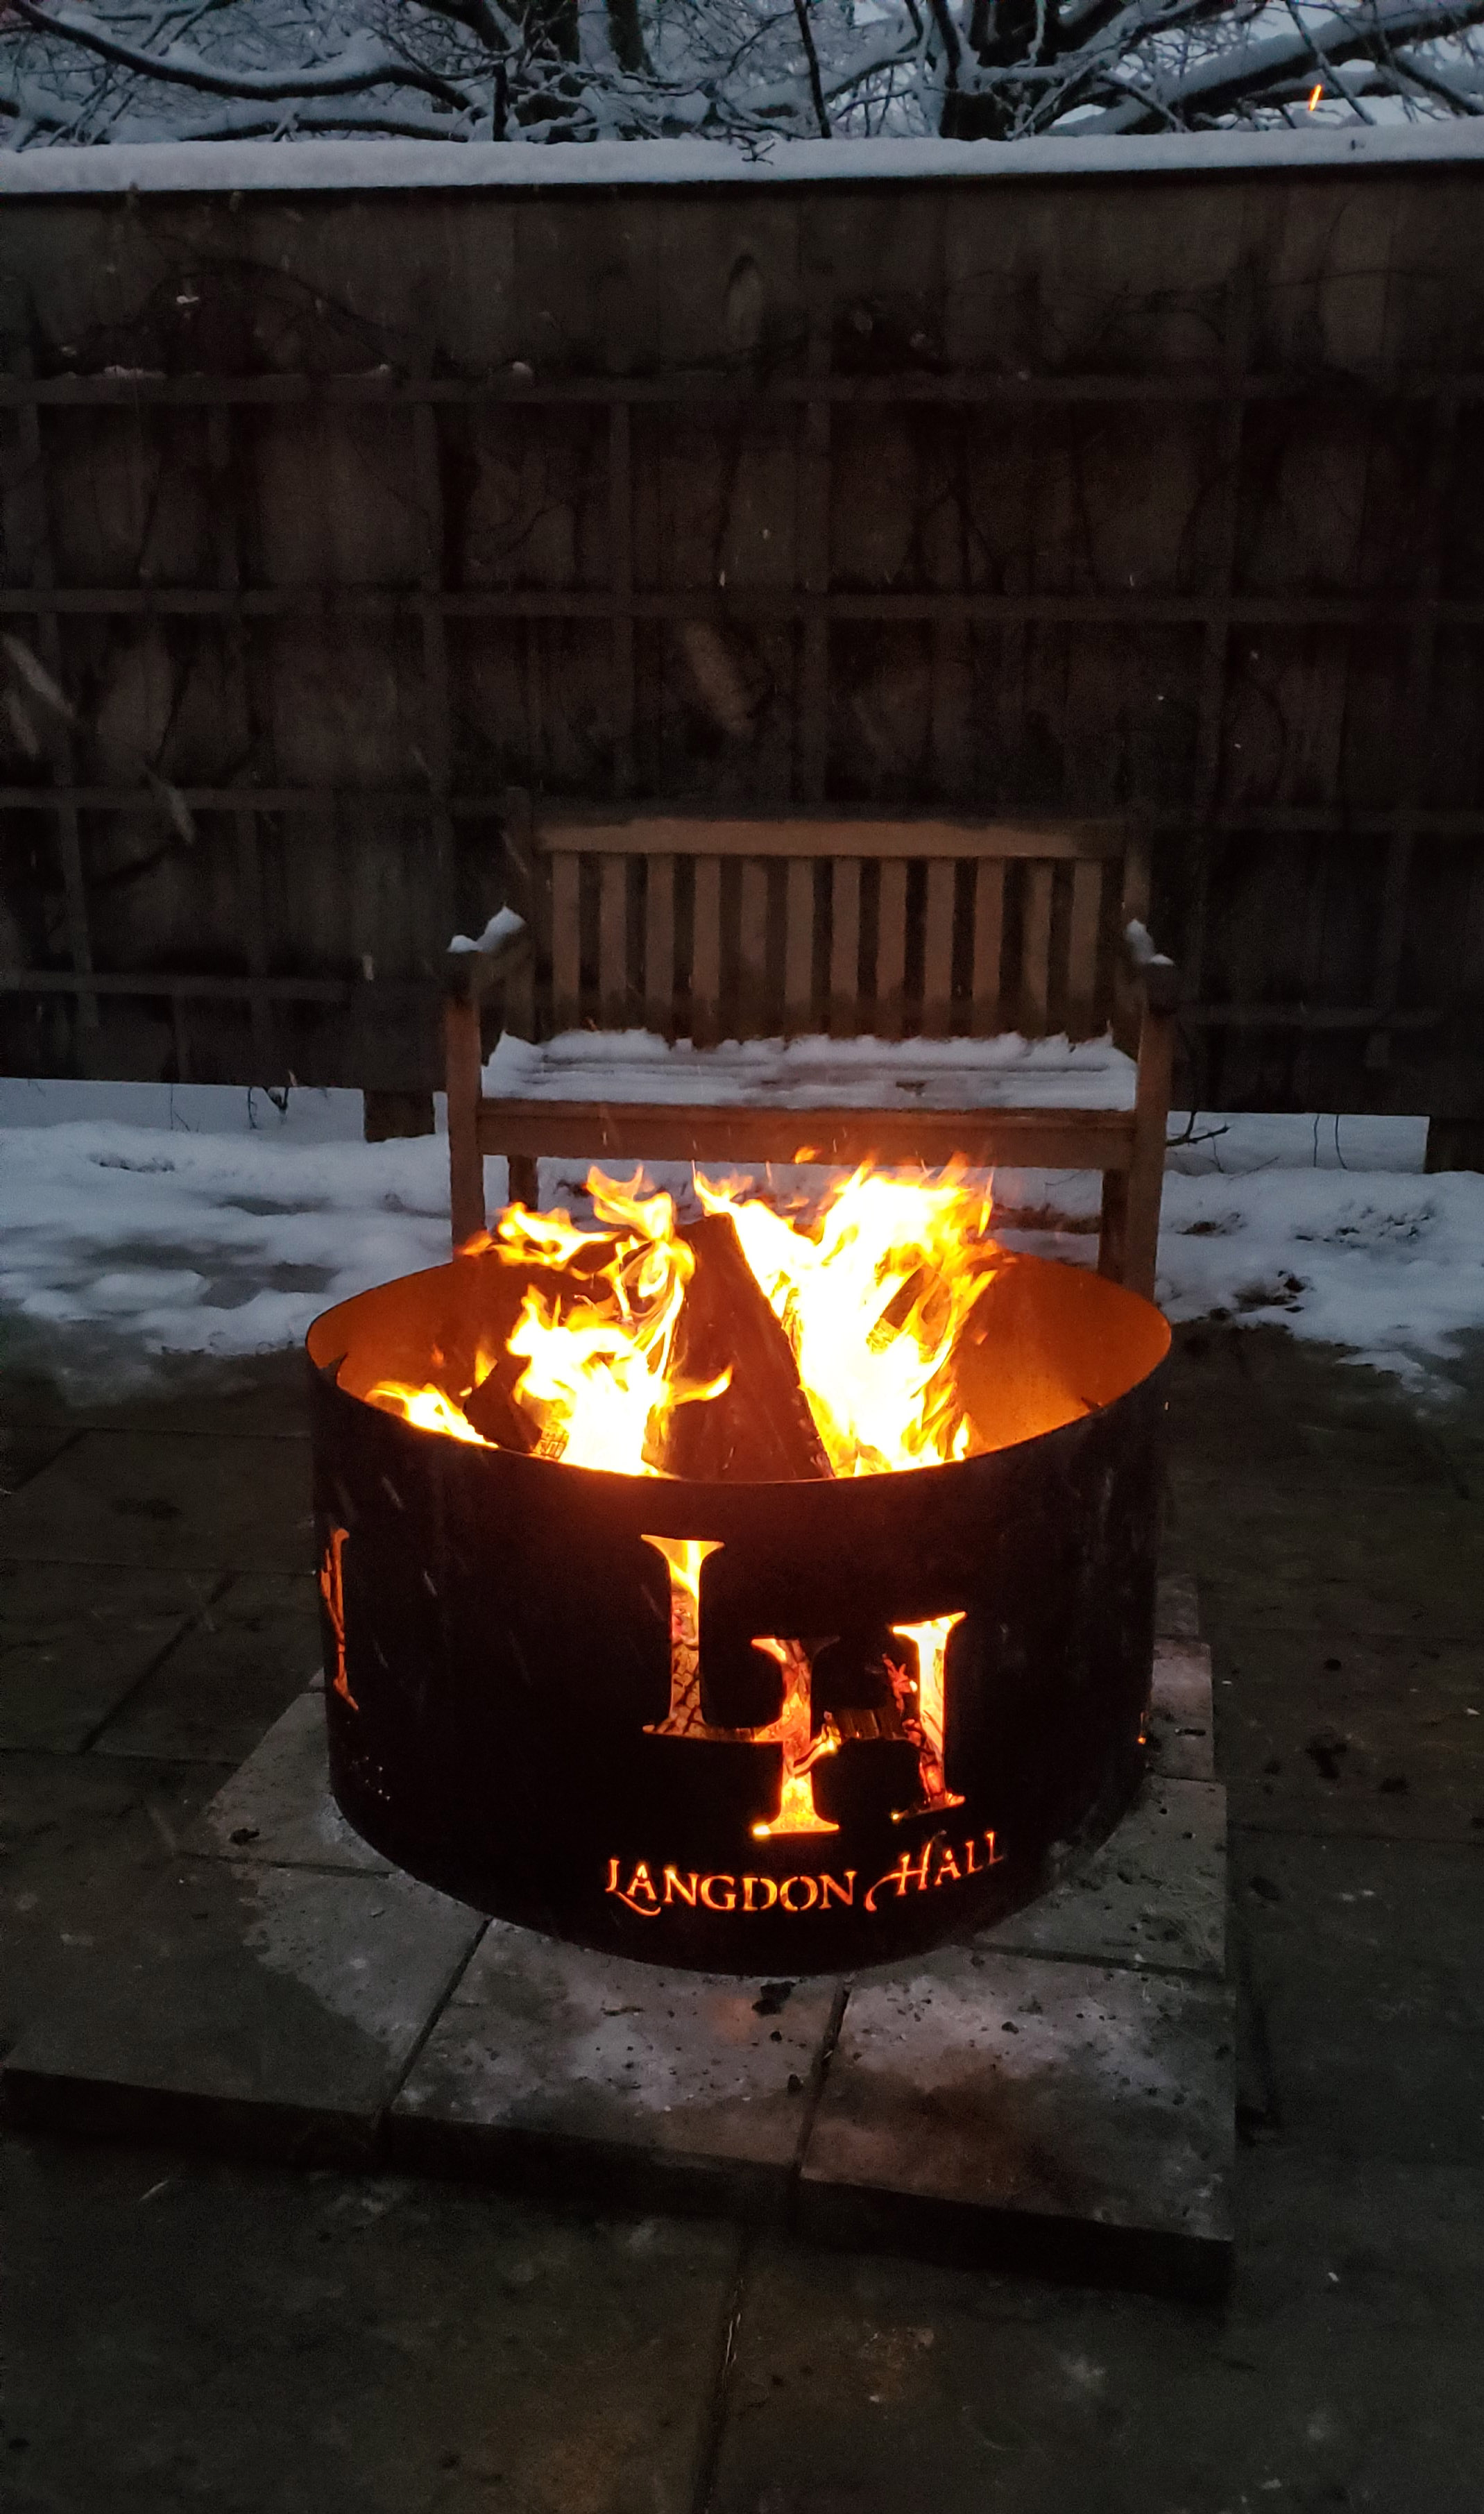 Fire Pits Are This Winter S Hottest, Are Propane Fire Pits Legal In Ontario County New York